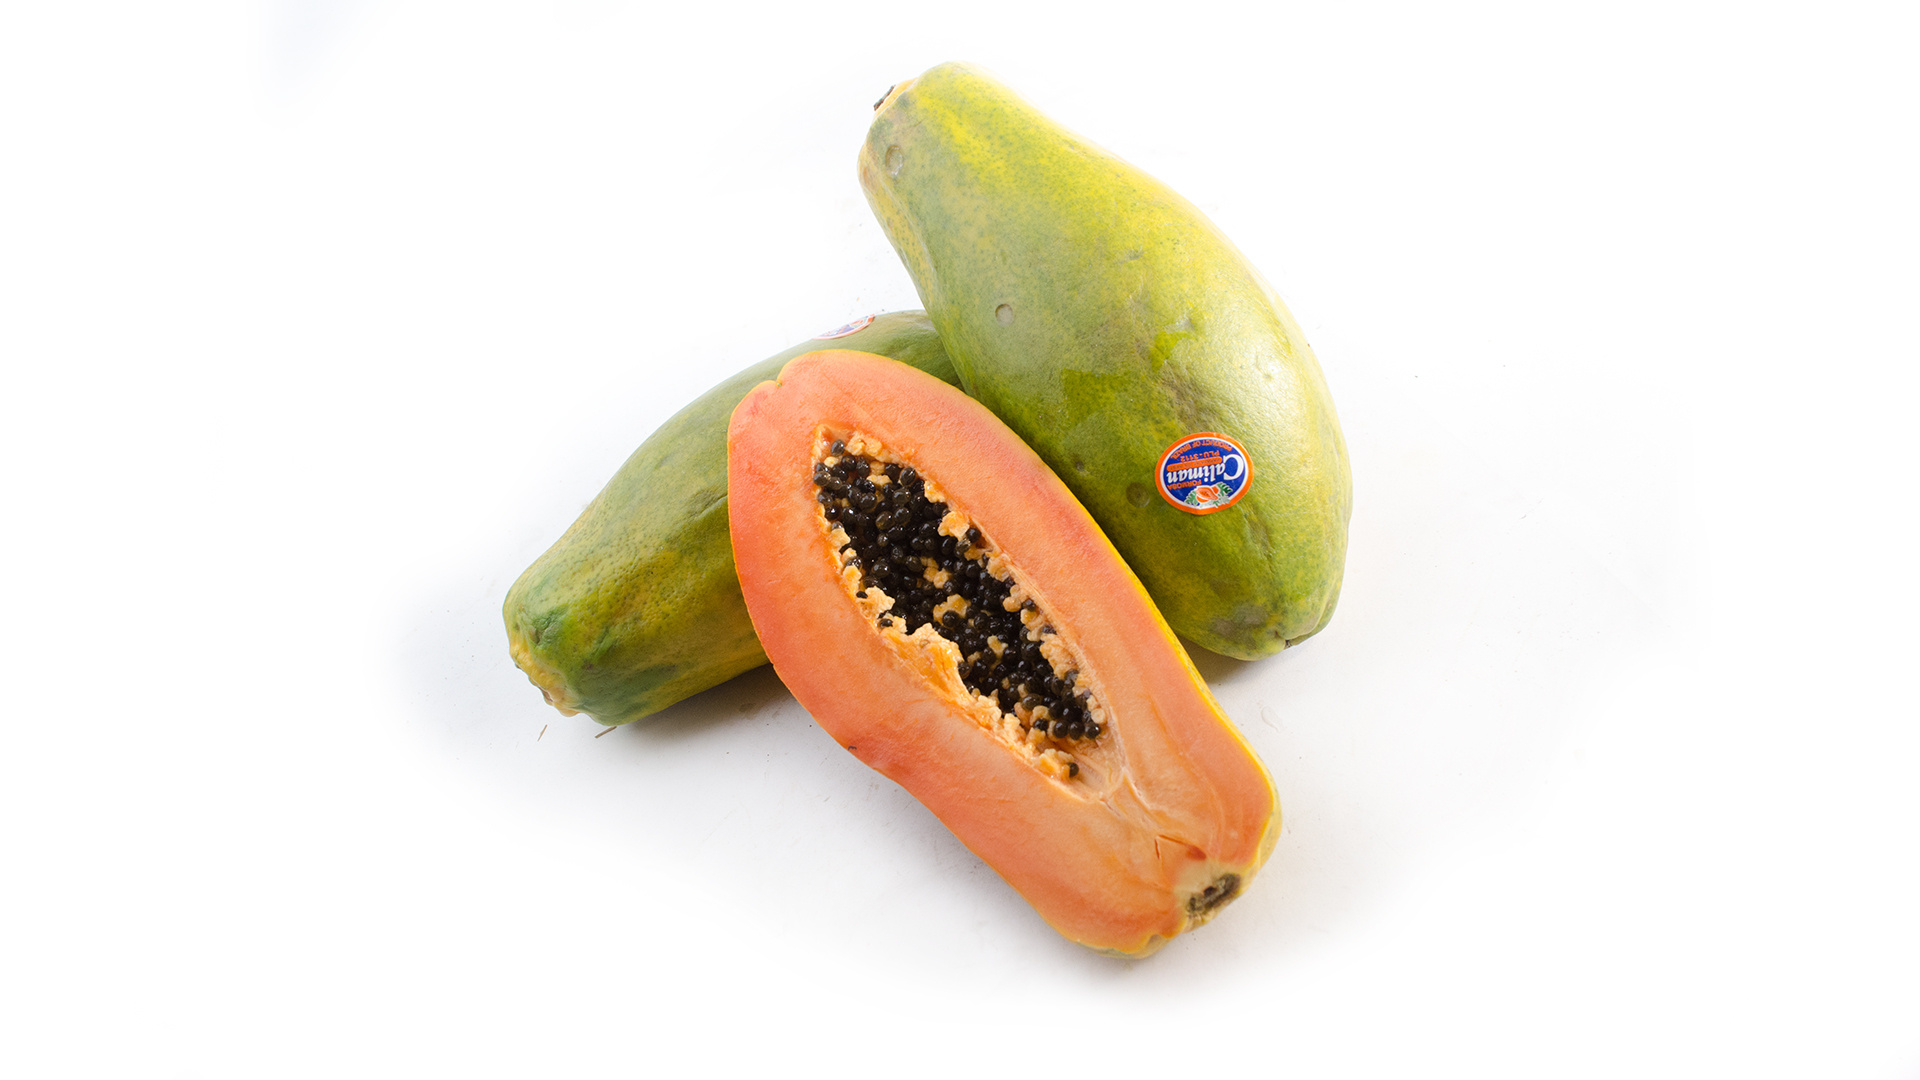 Papaya: A nutritious tropical fruit native to Mexico and South America. 1920x1080 Full HD Wallpaper.